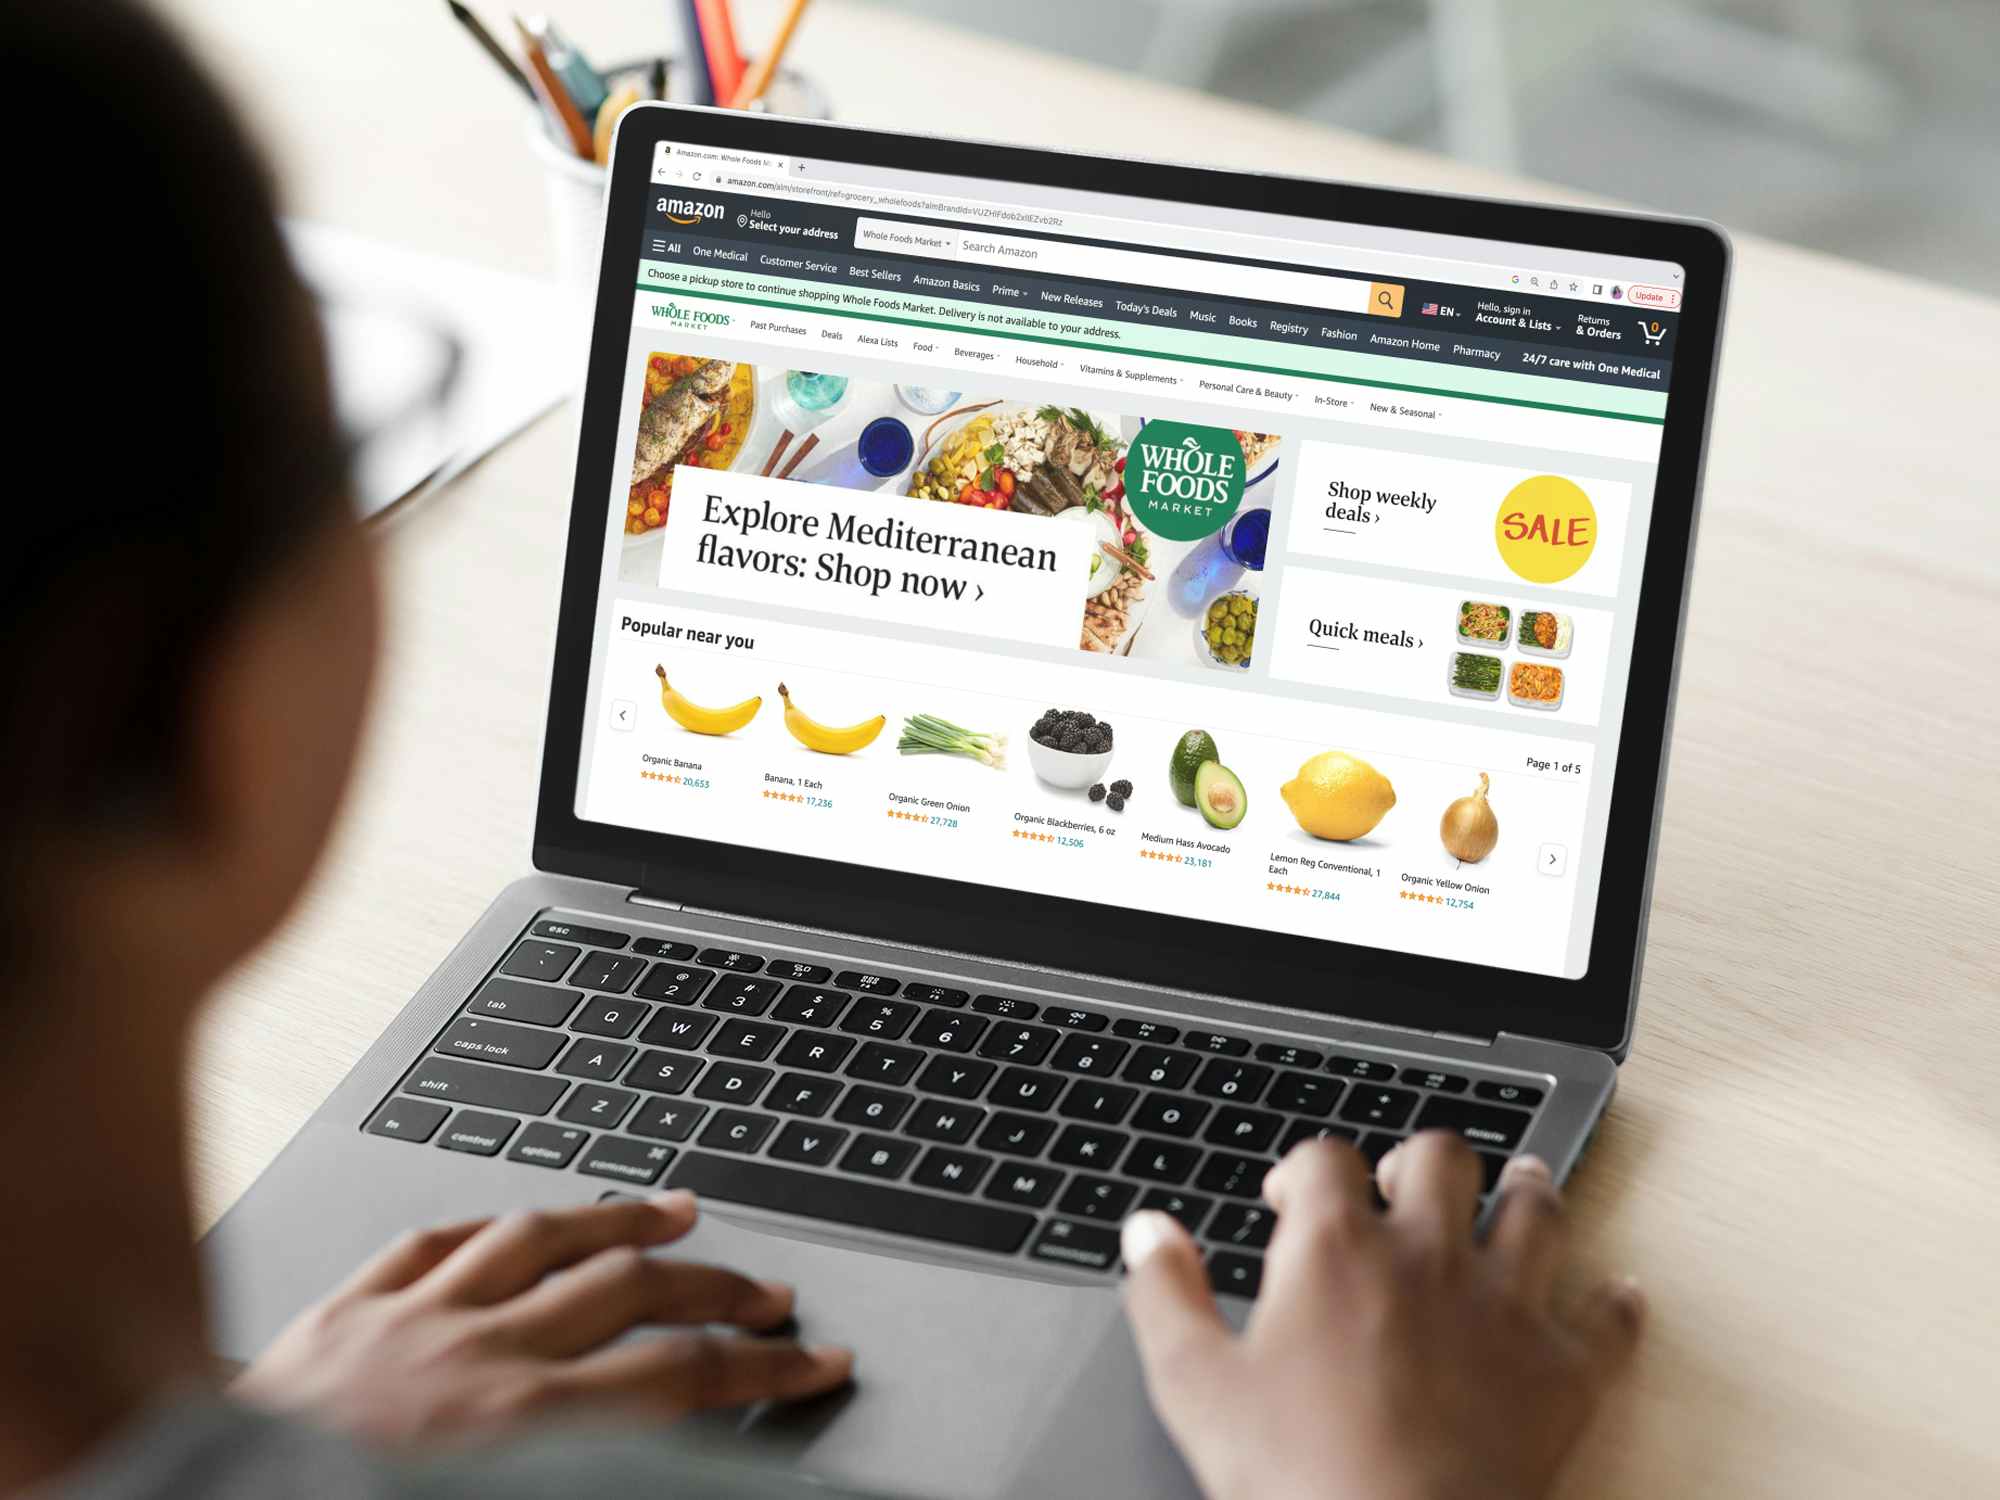 a person looking at whole food items on the amazon fresh website